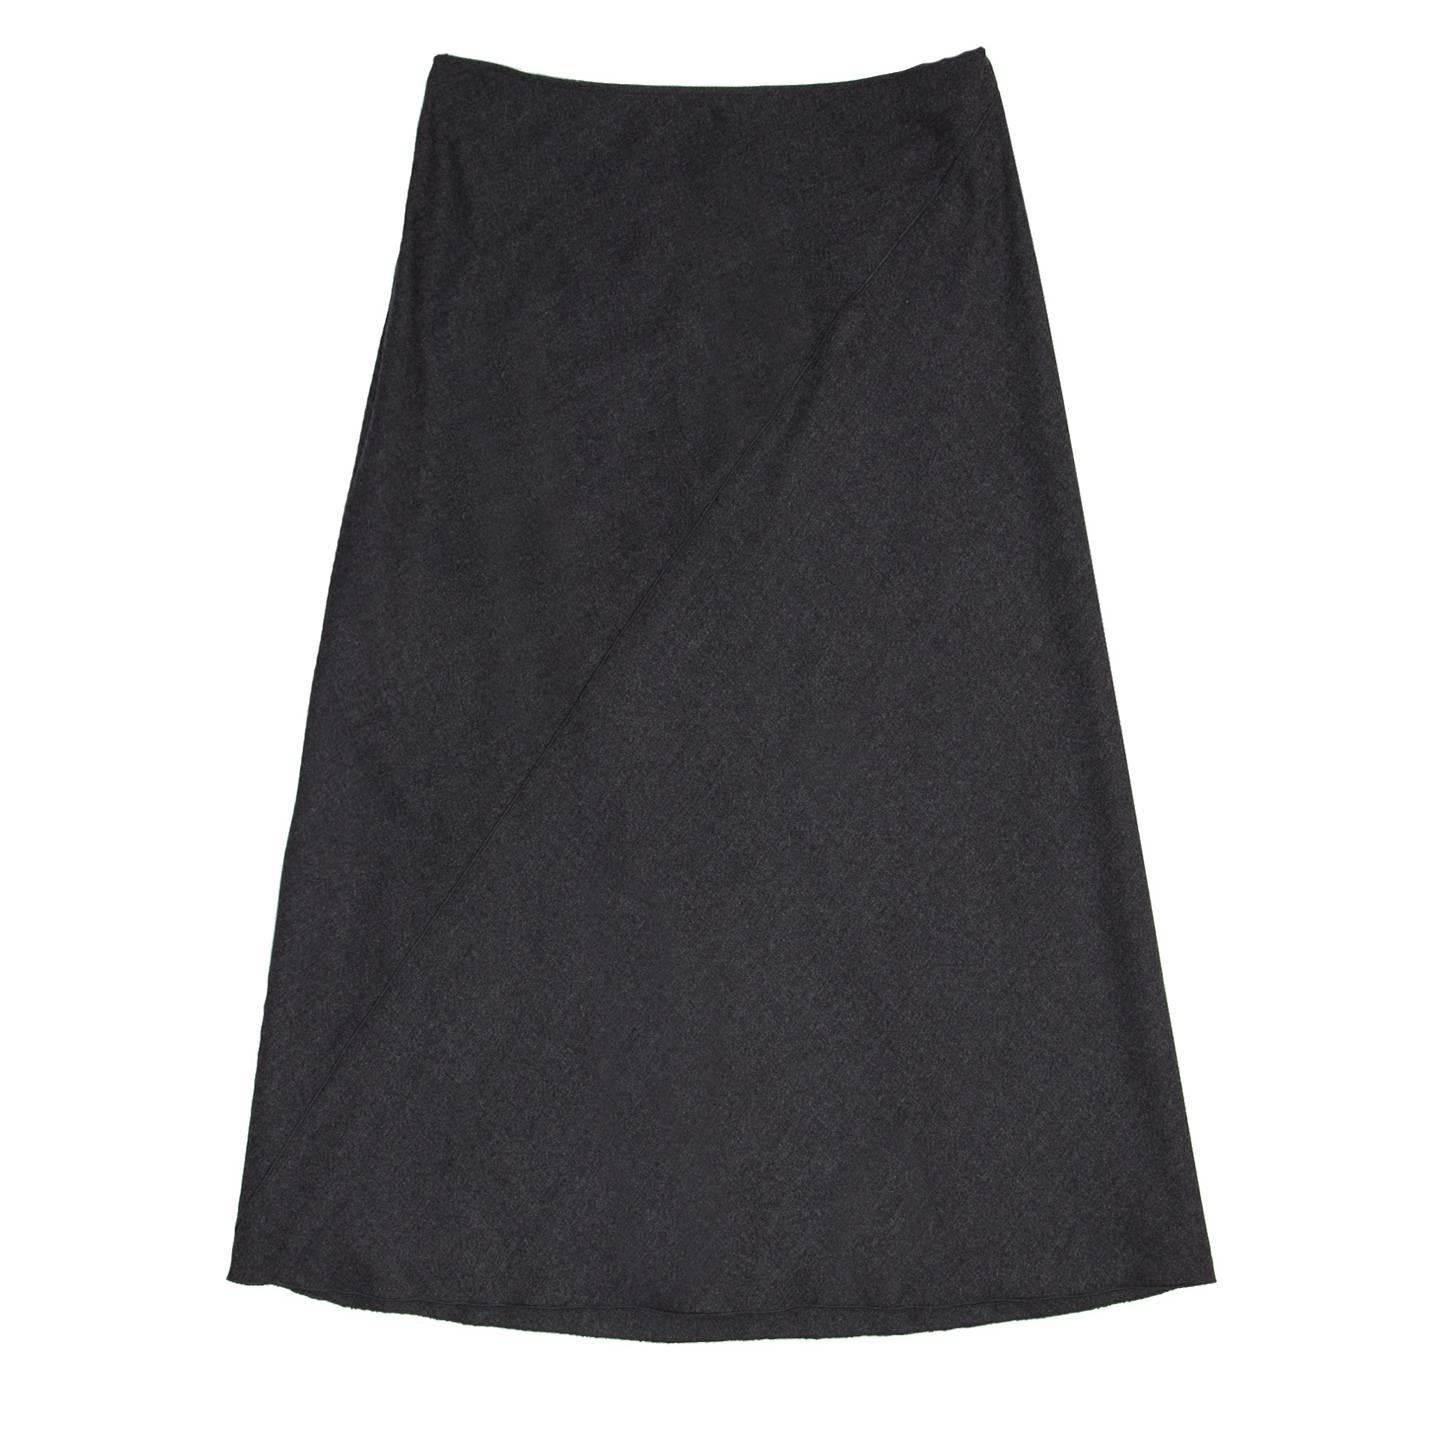 Charcoal grey fleece wool blend with elastane A-line with calf length. The skirt is made of oblique panels enriched by a tone-to-tone overlock as well as the hem. Made in Italy.

Size  42 French sizing

Condition  Excellent: worn once